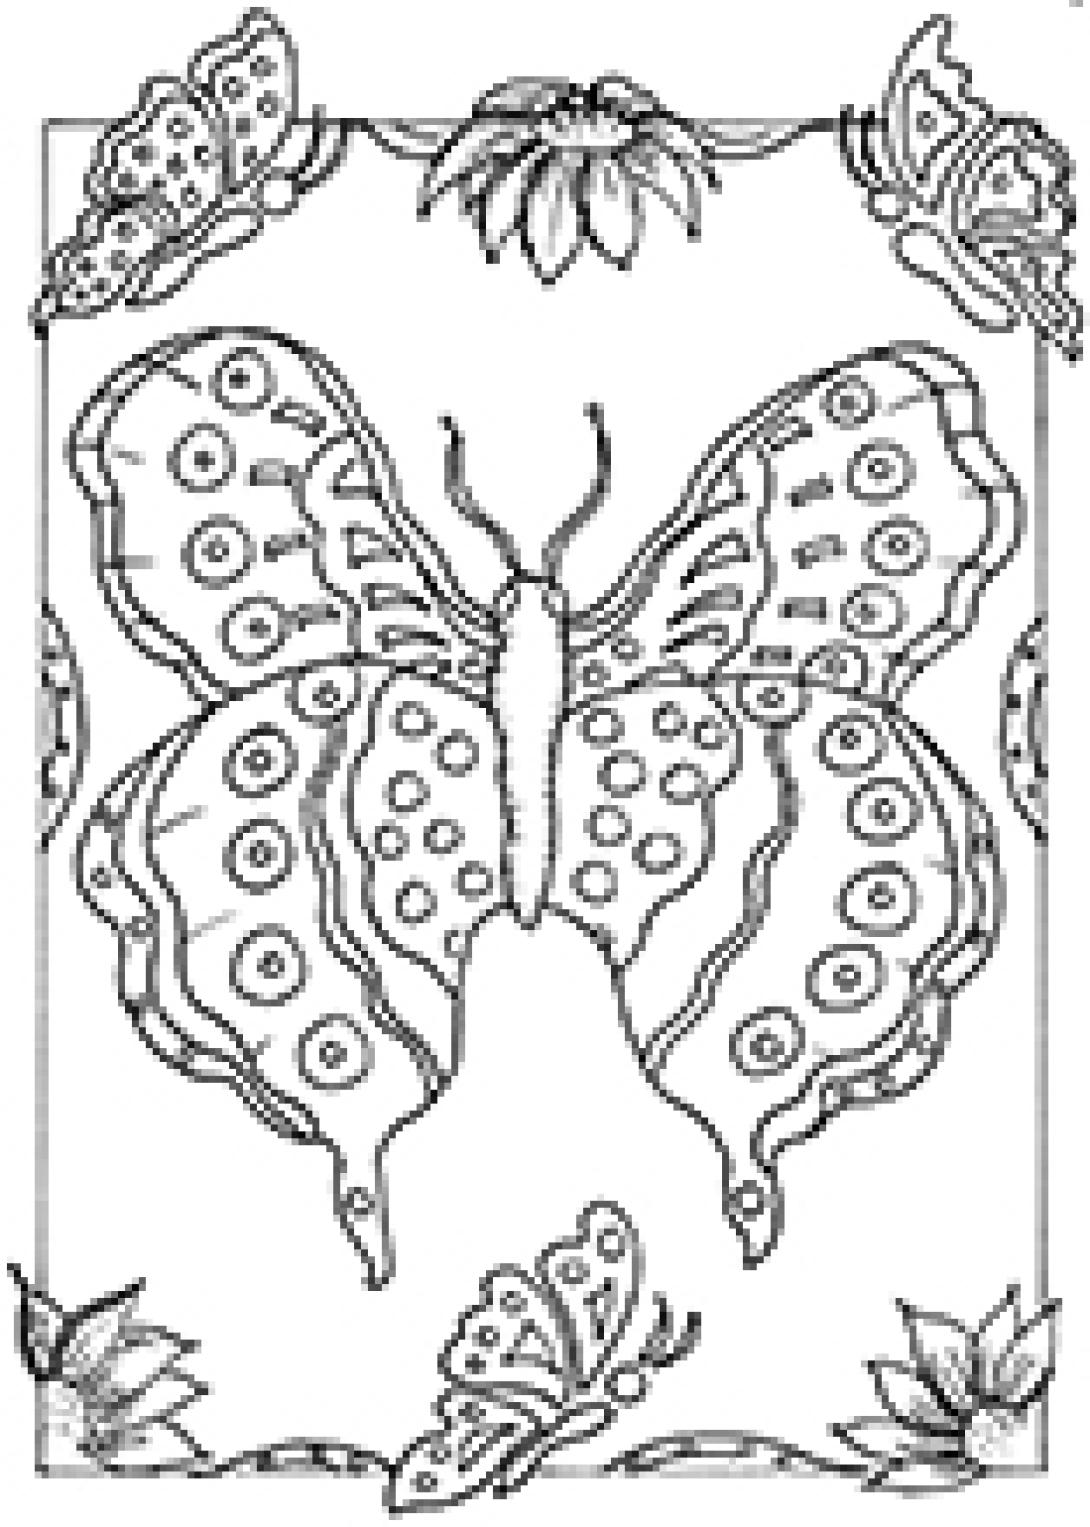 Butterfly coloring page